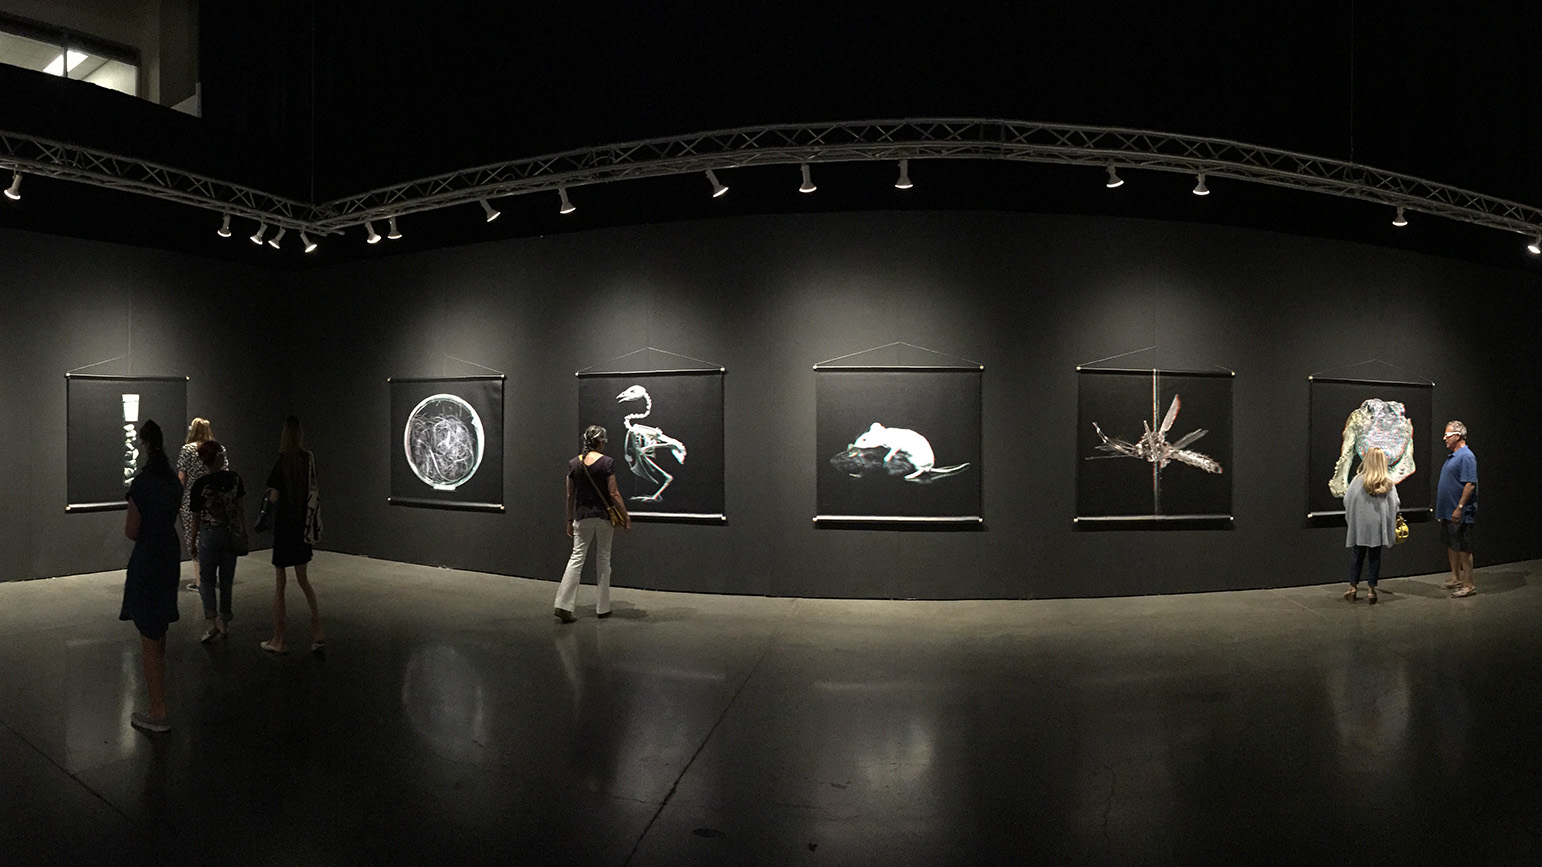 Photograph of gallery installation with large images of specimens from the Center for PostNatural History